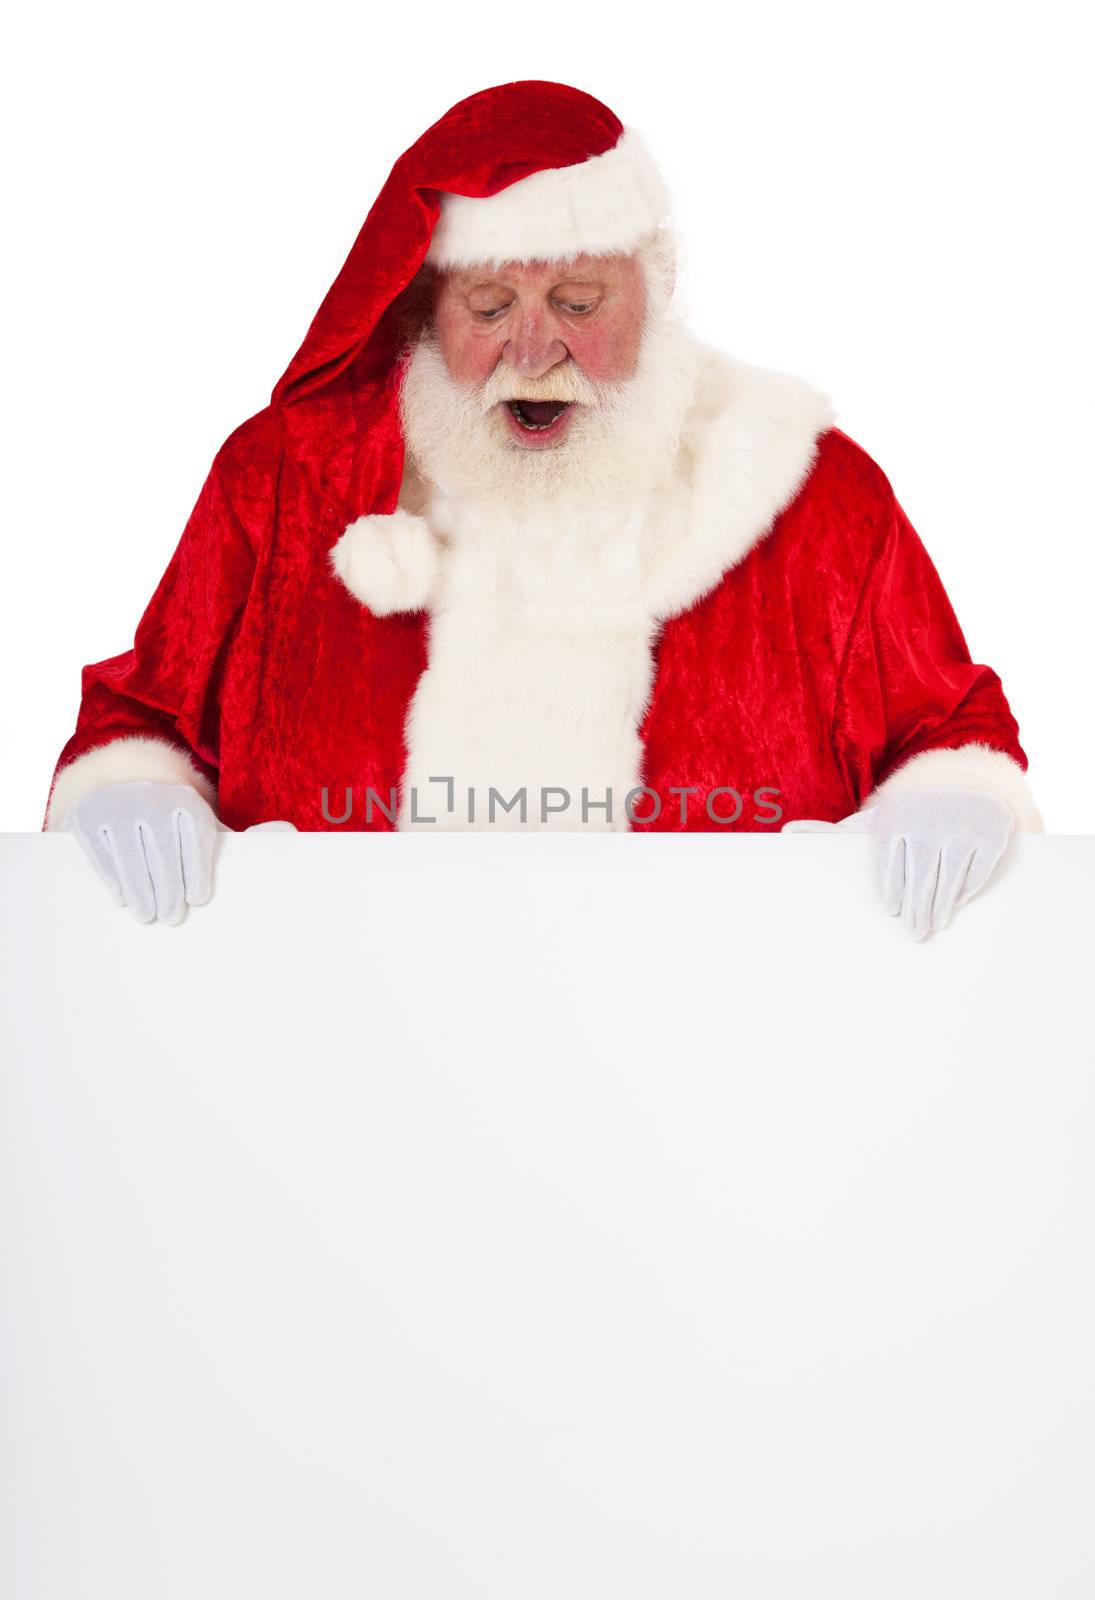 Santa Claus in authentic look behind blank sign with surprised expression. All on white background.